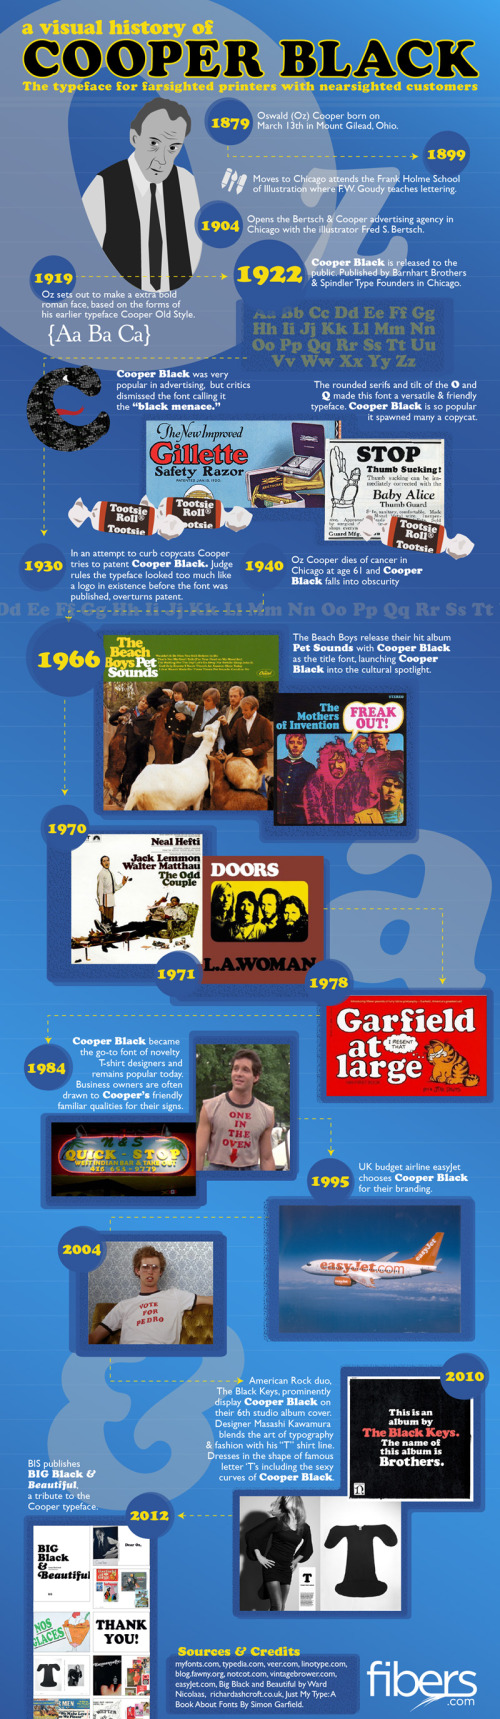 Visual HIstory of Cooper Black infographic